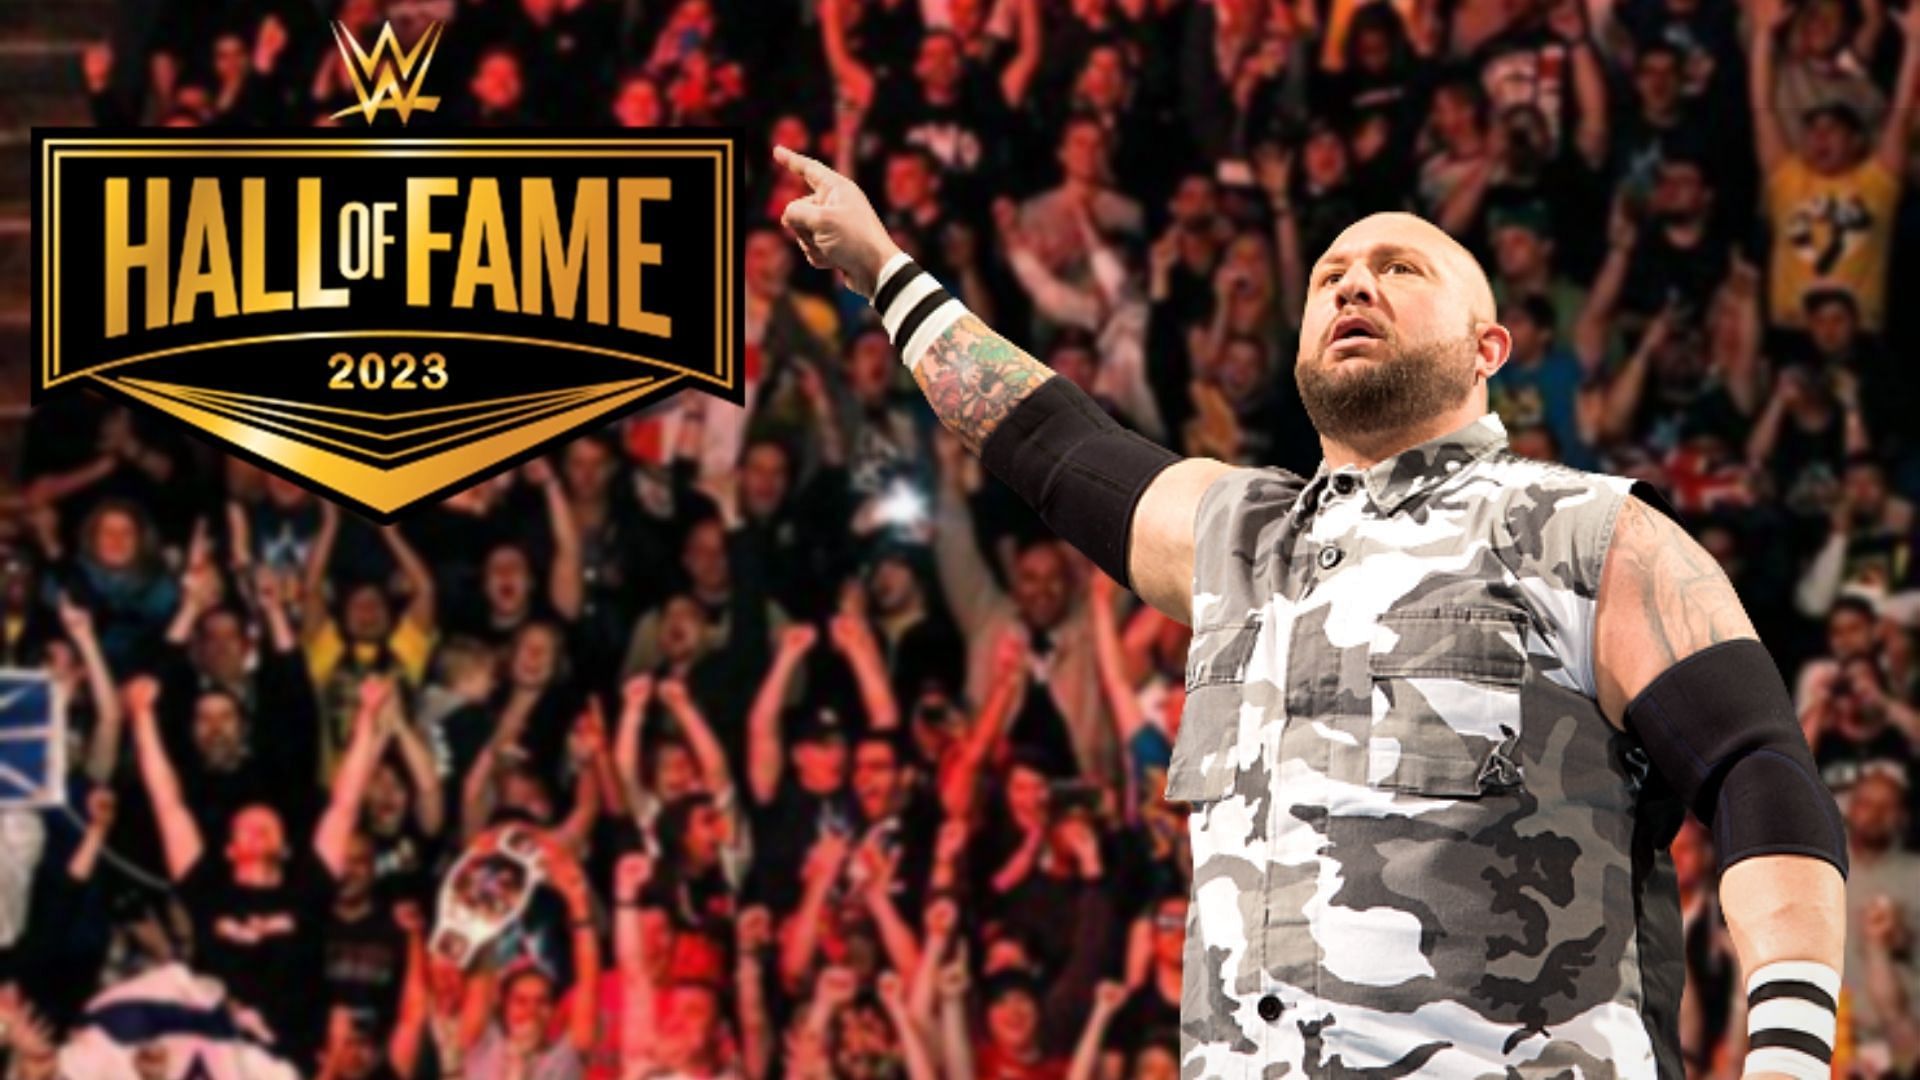 Bully Ray has someone in mind for the Hall of Fame Class of 2023